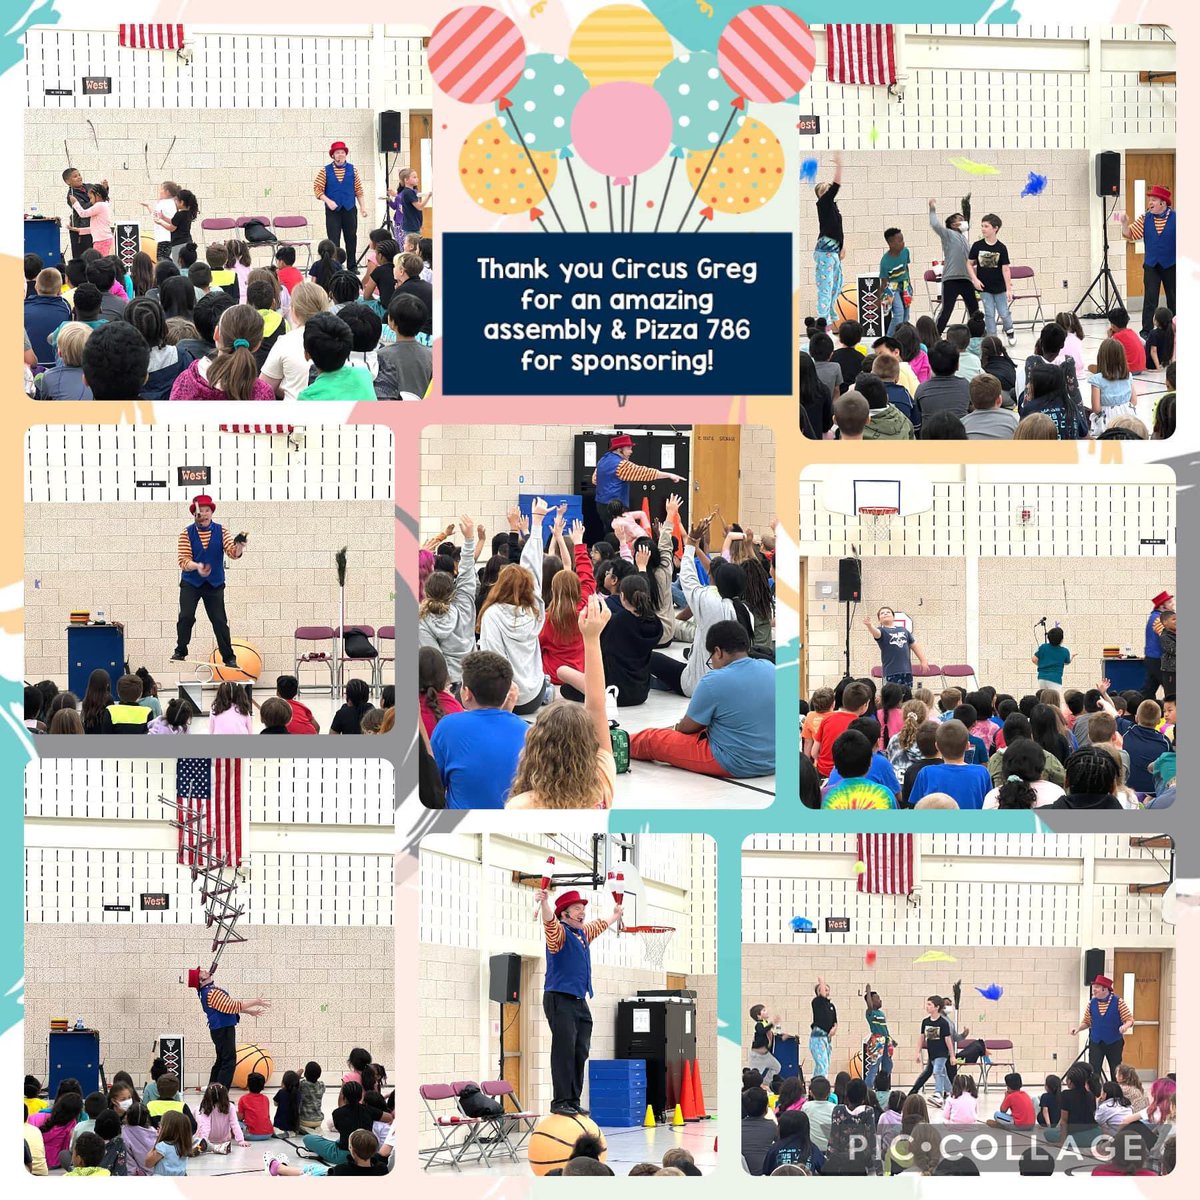 ✨ @HalethorpeElem PTA finished #TeacherAppreciationWeek with a @panerabread luncheon, more prizes, & an assembly by Gregory May Circus Arts - CRCS. The Ss & adults had an amazing time!! TY for your #partnership‼️✨ #CommunitySchools #TeacherAppreciationWeek 
#ExpandedLearning